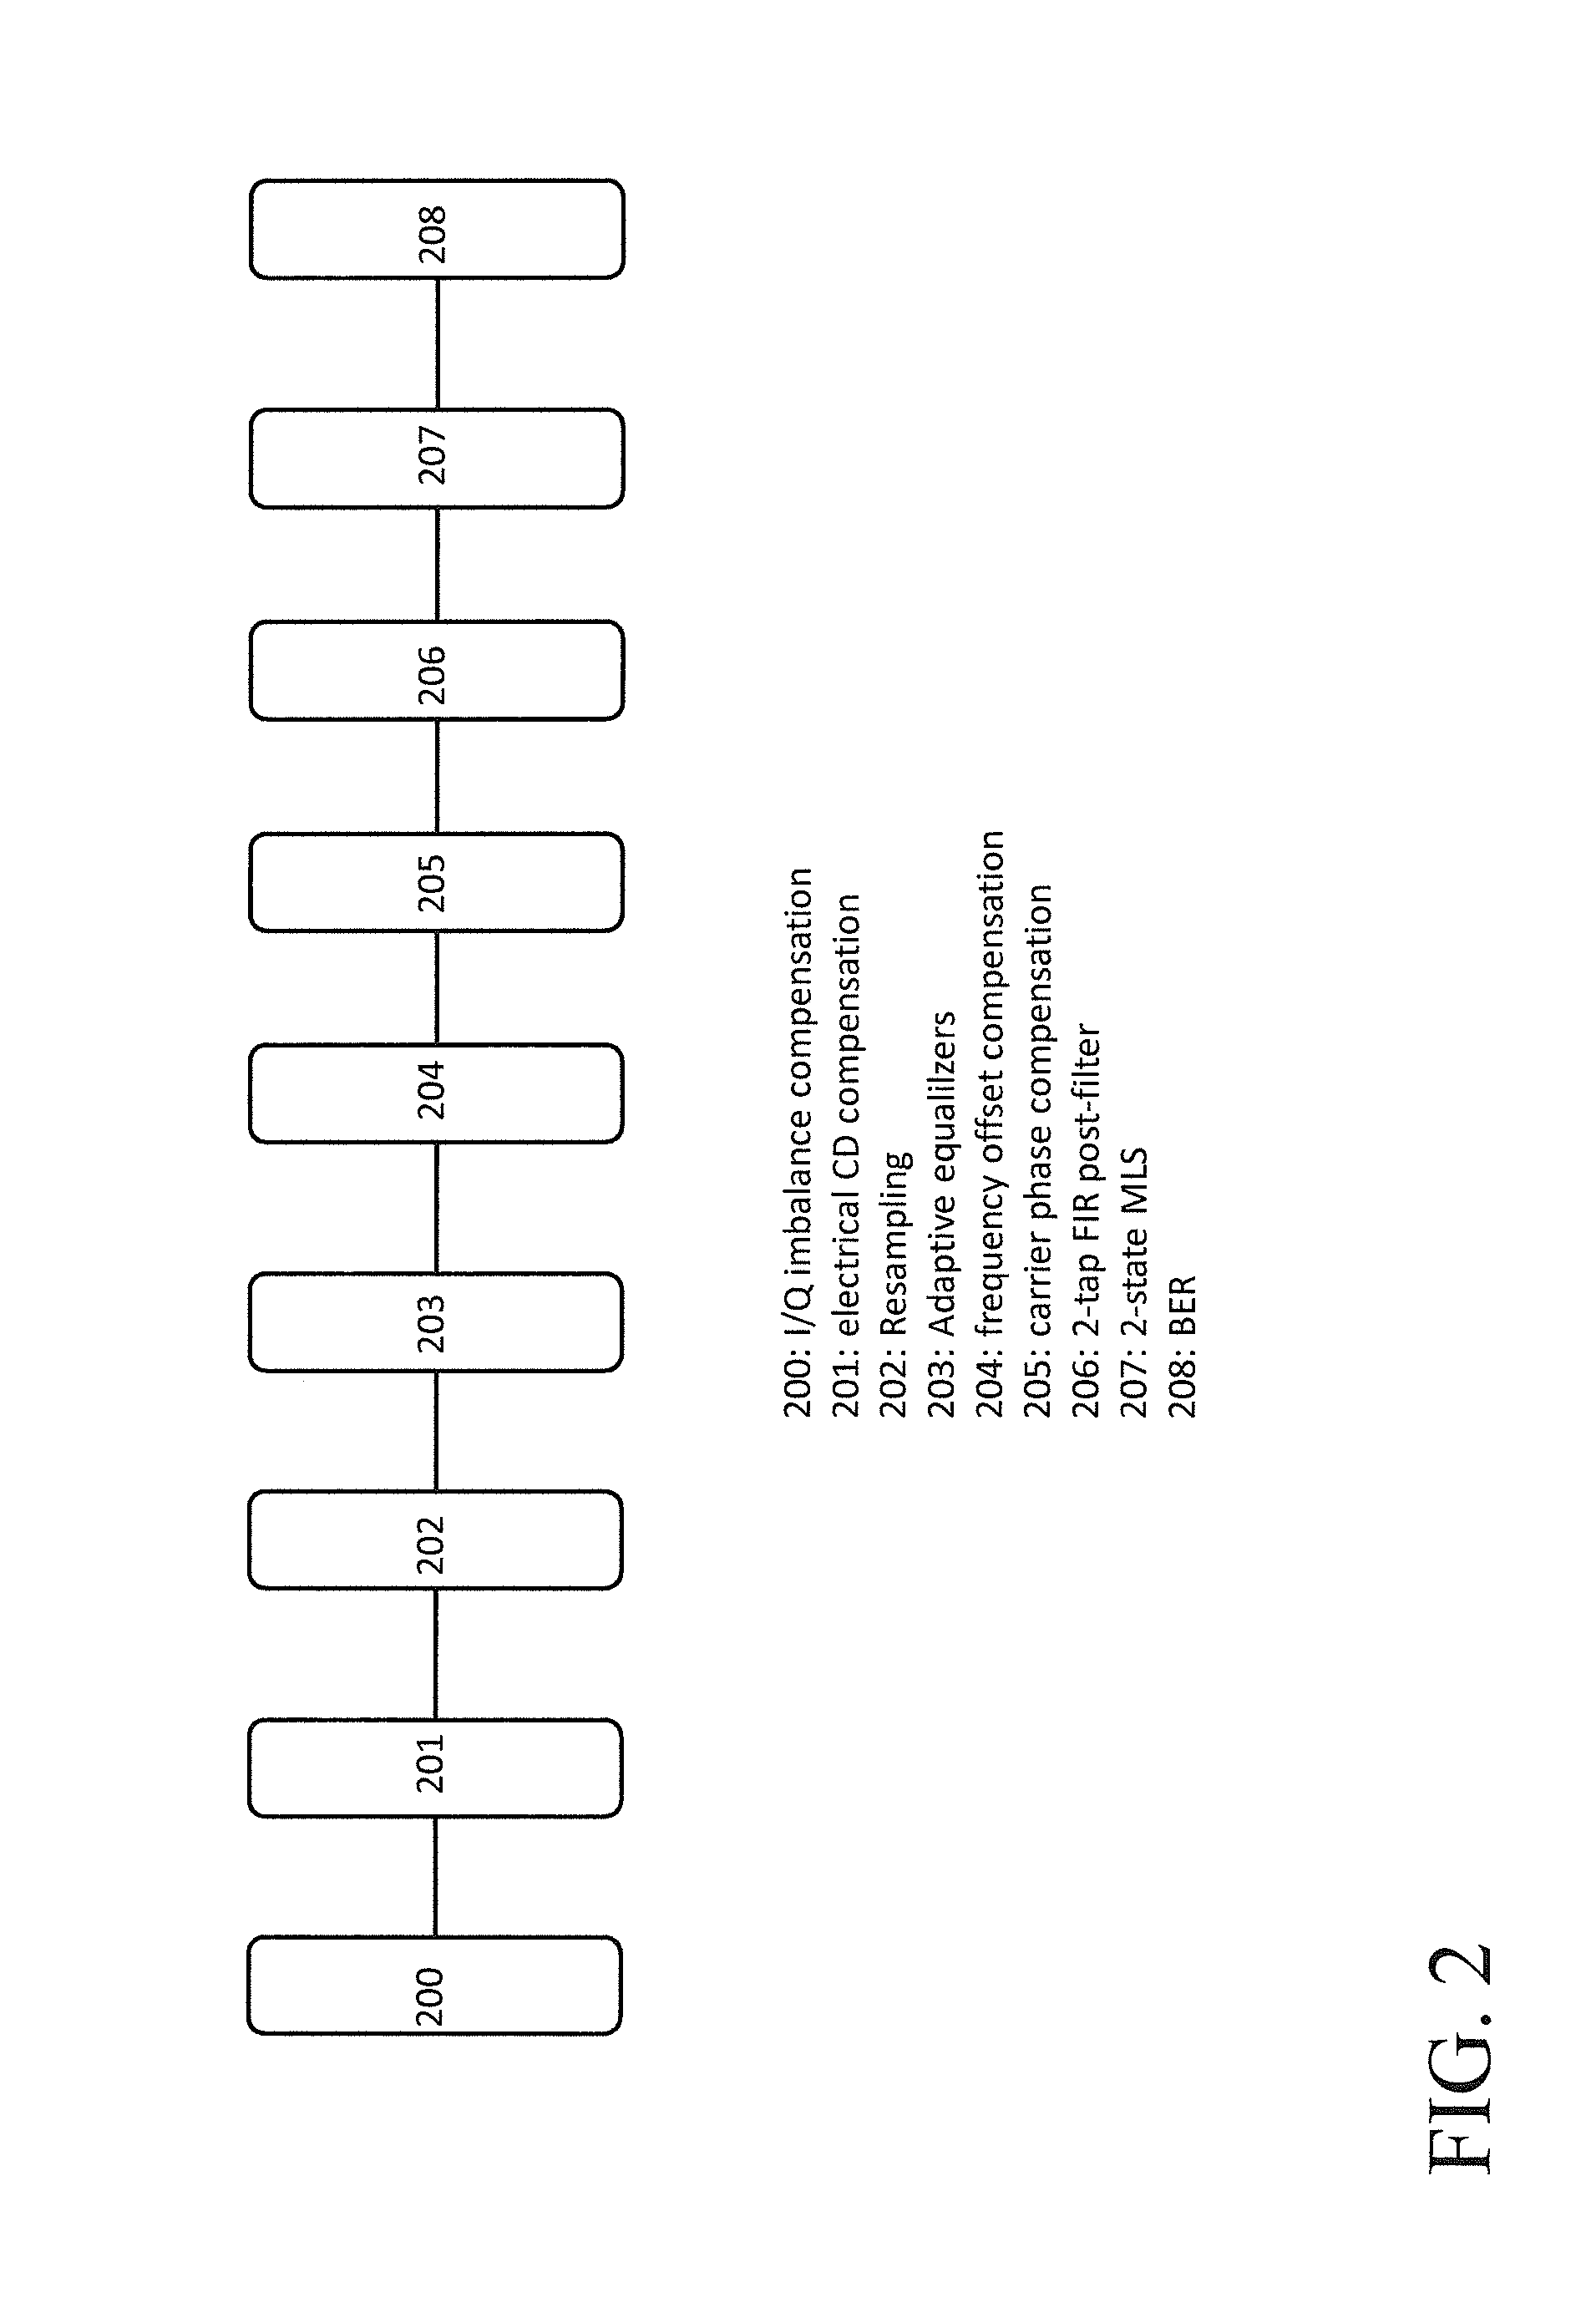 System and method for coherent detection with digital signal procession